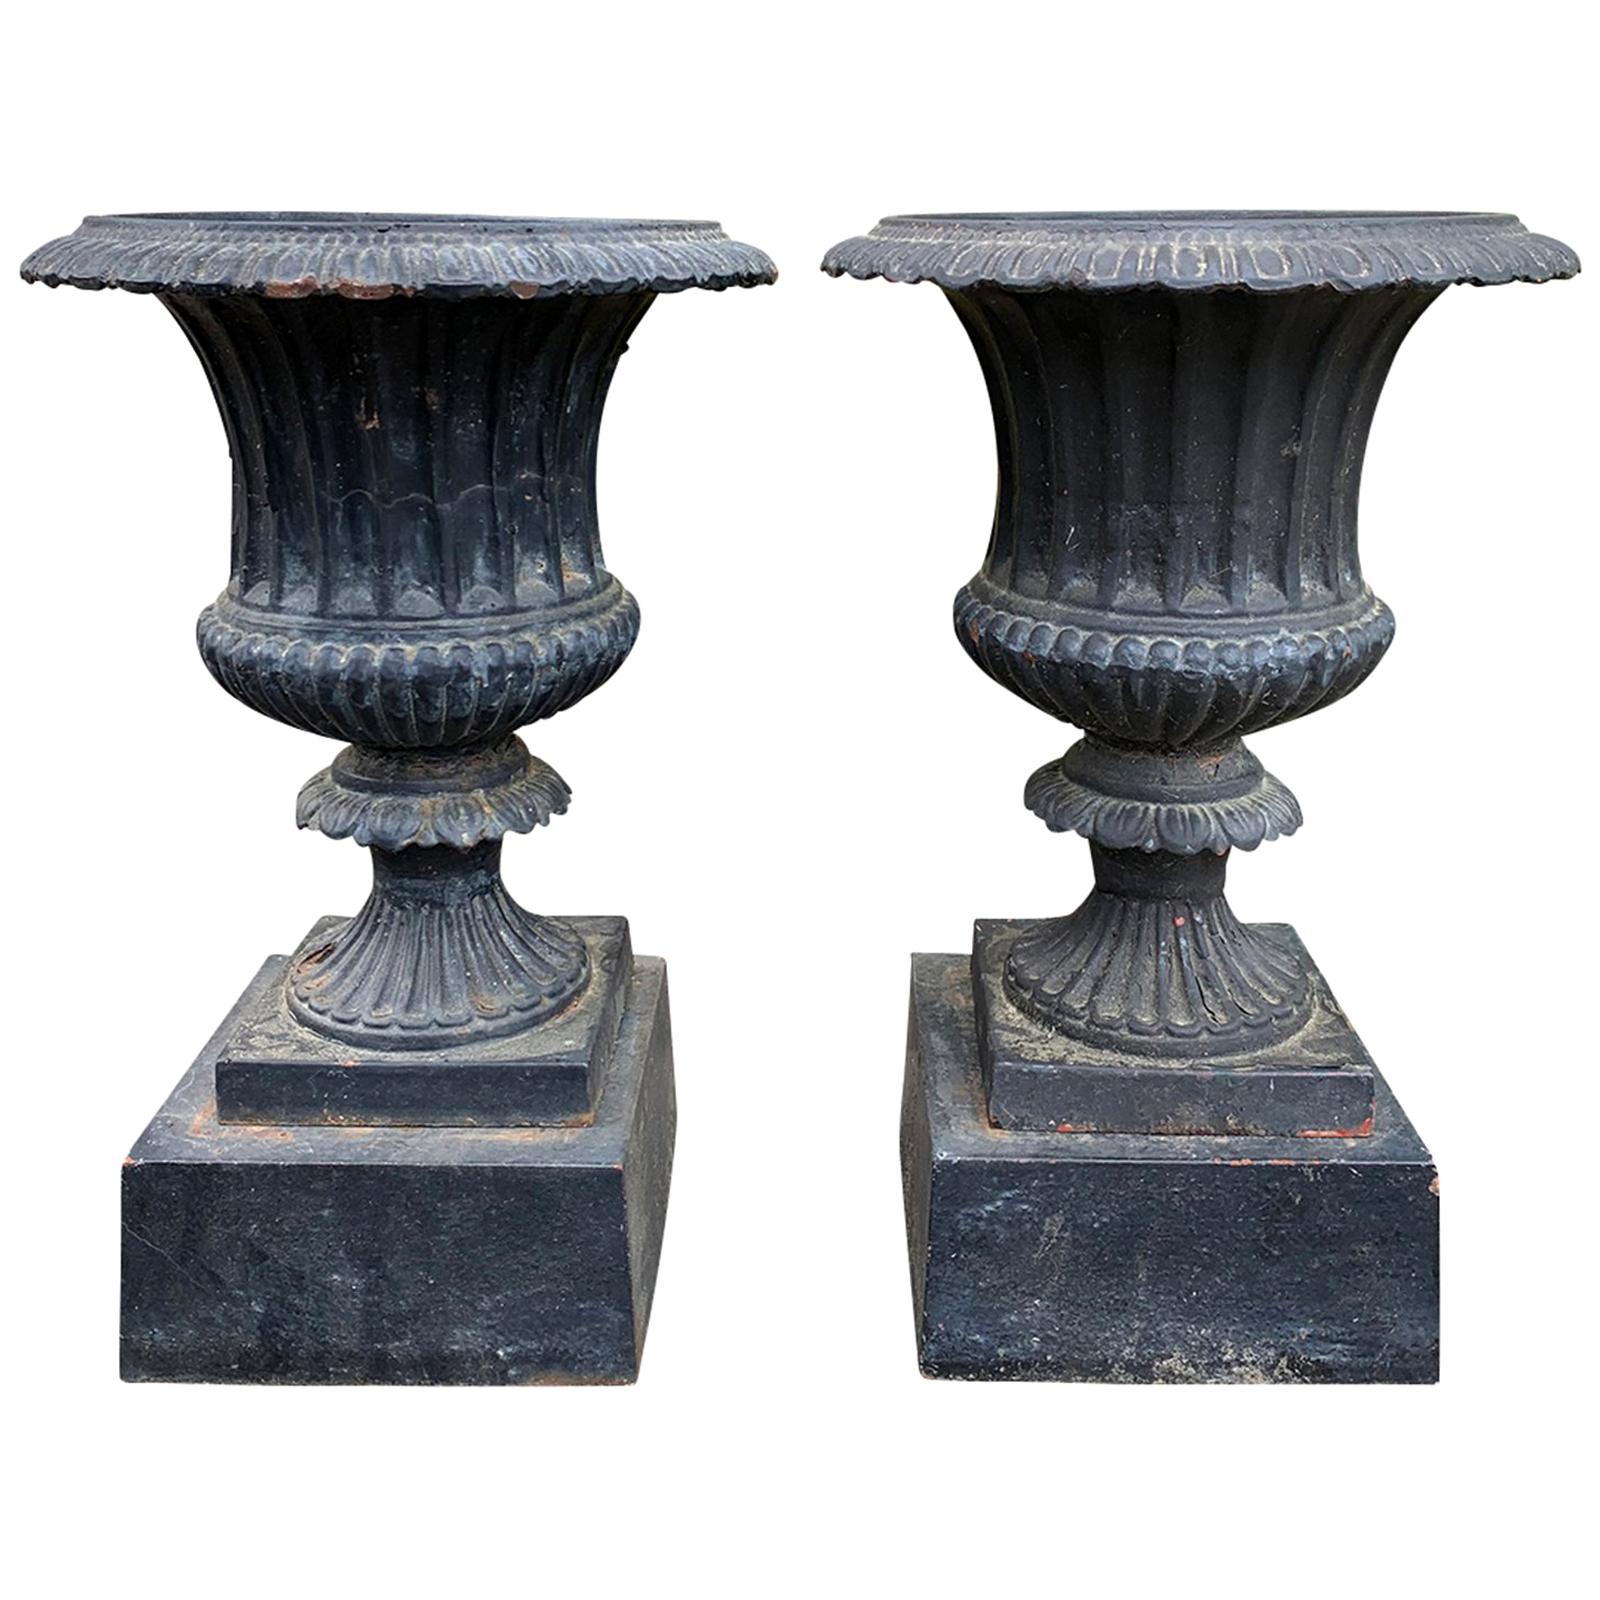 Pair of Neoclassical Iron Urns with Stands, circa 1900